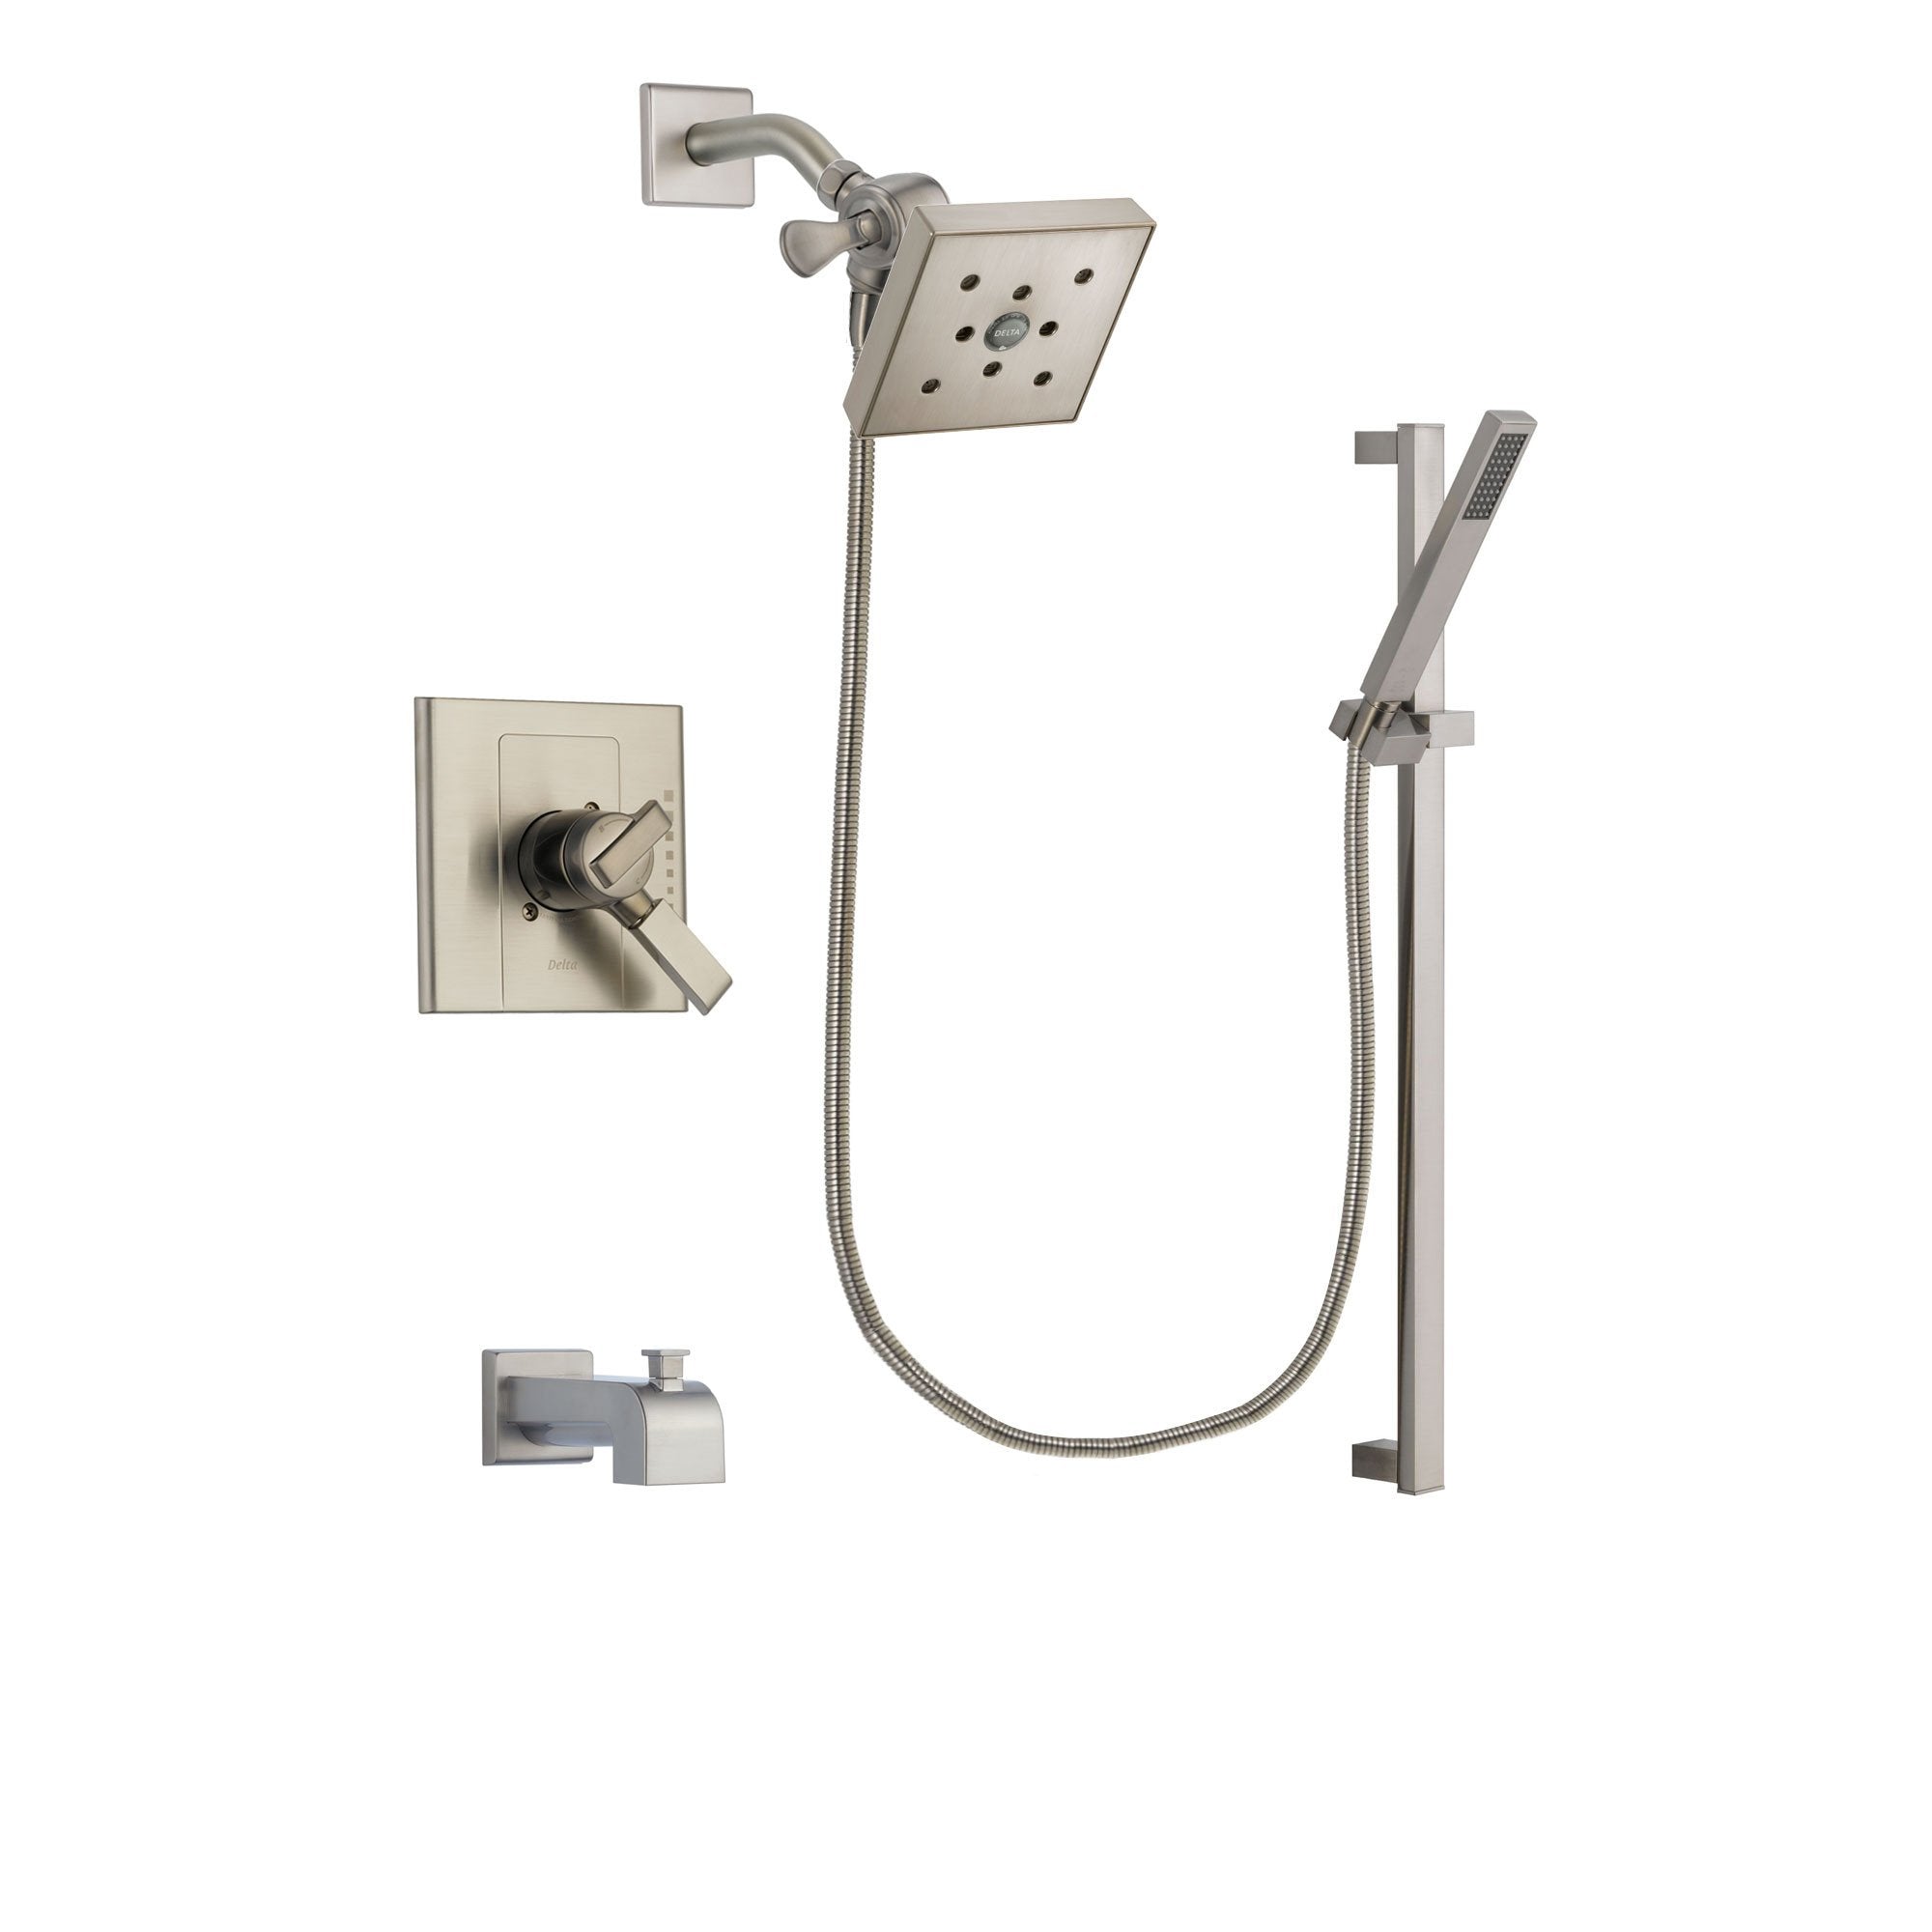 Delta Arzo Stainless Steel Finish Dual Control Tub and Shower Faucet System Package with Square Shower Head and Modern Personal Hand Shower with Slide Bar Includes Rough-in Valve and Tub Spout DSP2379V